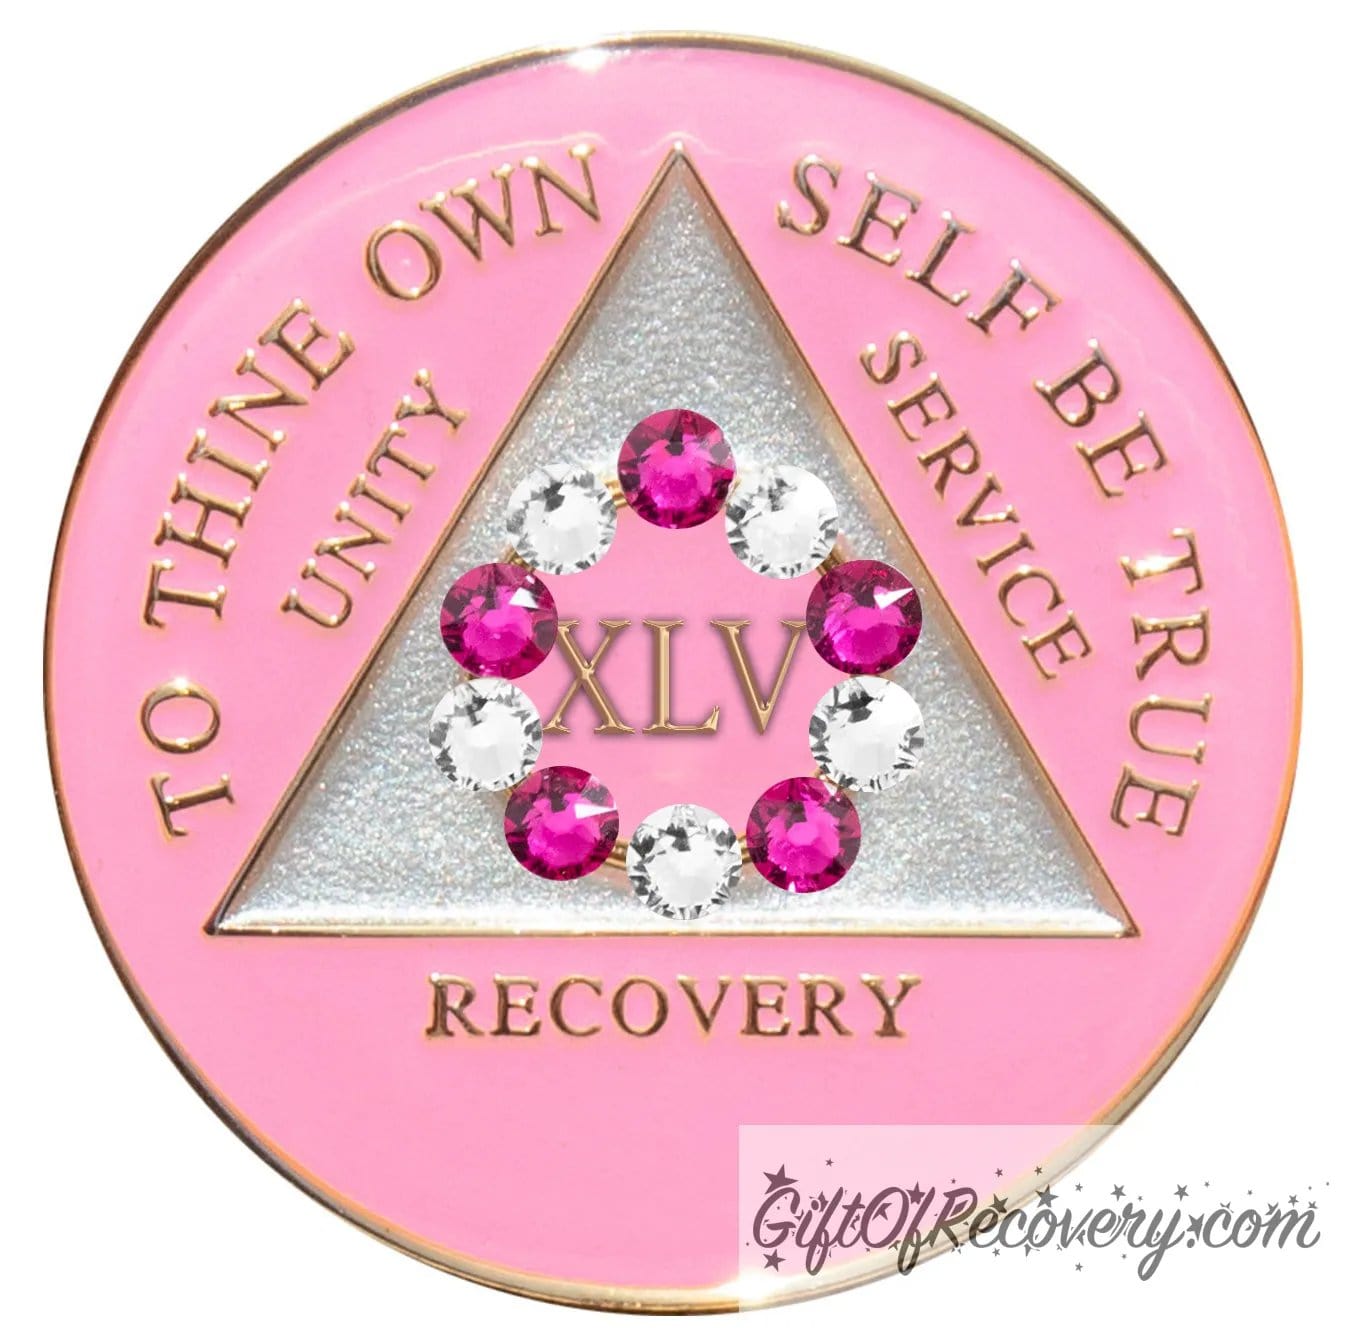 45 year princess pink AA medallion with a pearl white triangle center and pink circle, surrounding the roman numeral 45 are 10 genuine crystals, 5 dark pink and 5 clear, perfect for your favorite sober princess, to thine own self be true, unity, service, recovery, the rim of the medallion, the raised triangle outline, and the roman numeral year, are in 14k gold, sealed with resin for a glossy finish.